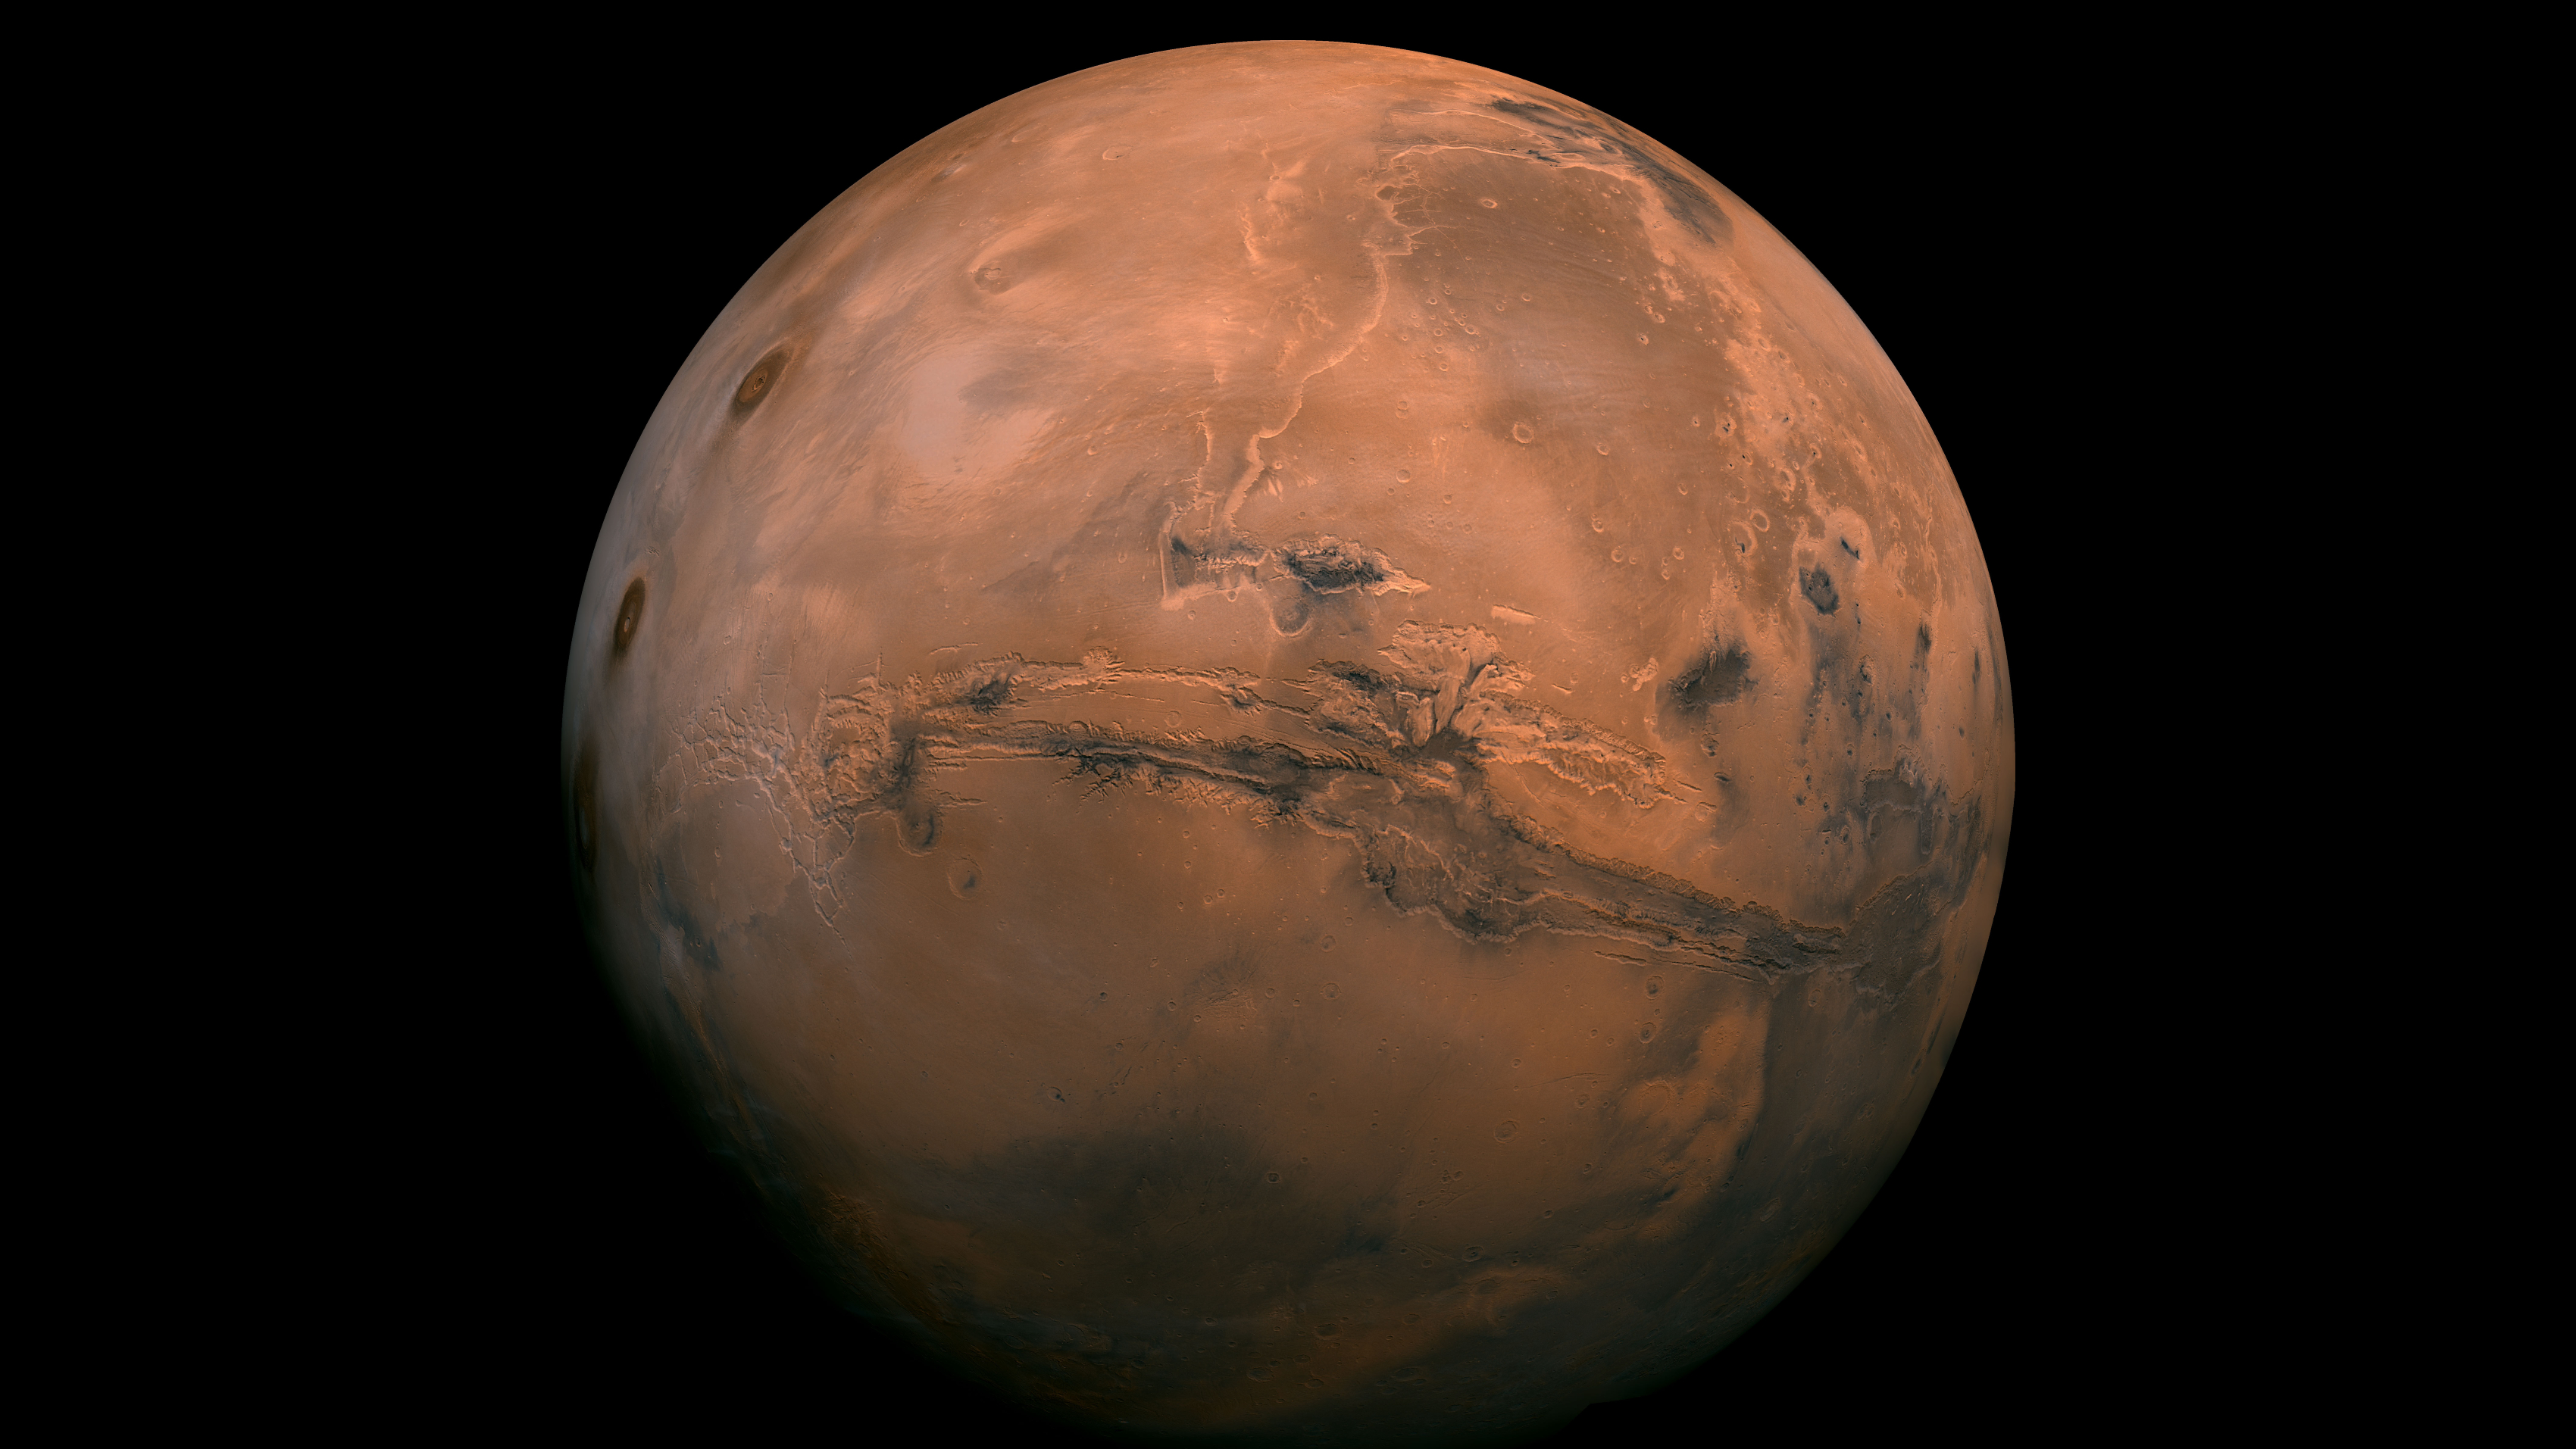 Image of Mars against the Black backdrop of space. The planet is a rusty red color.